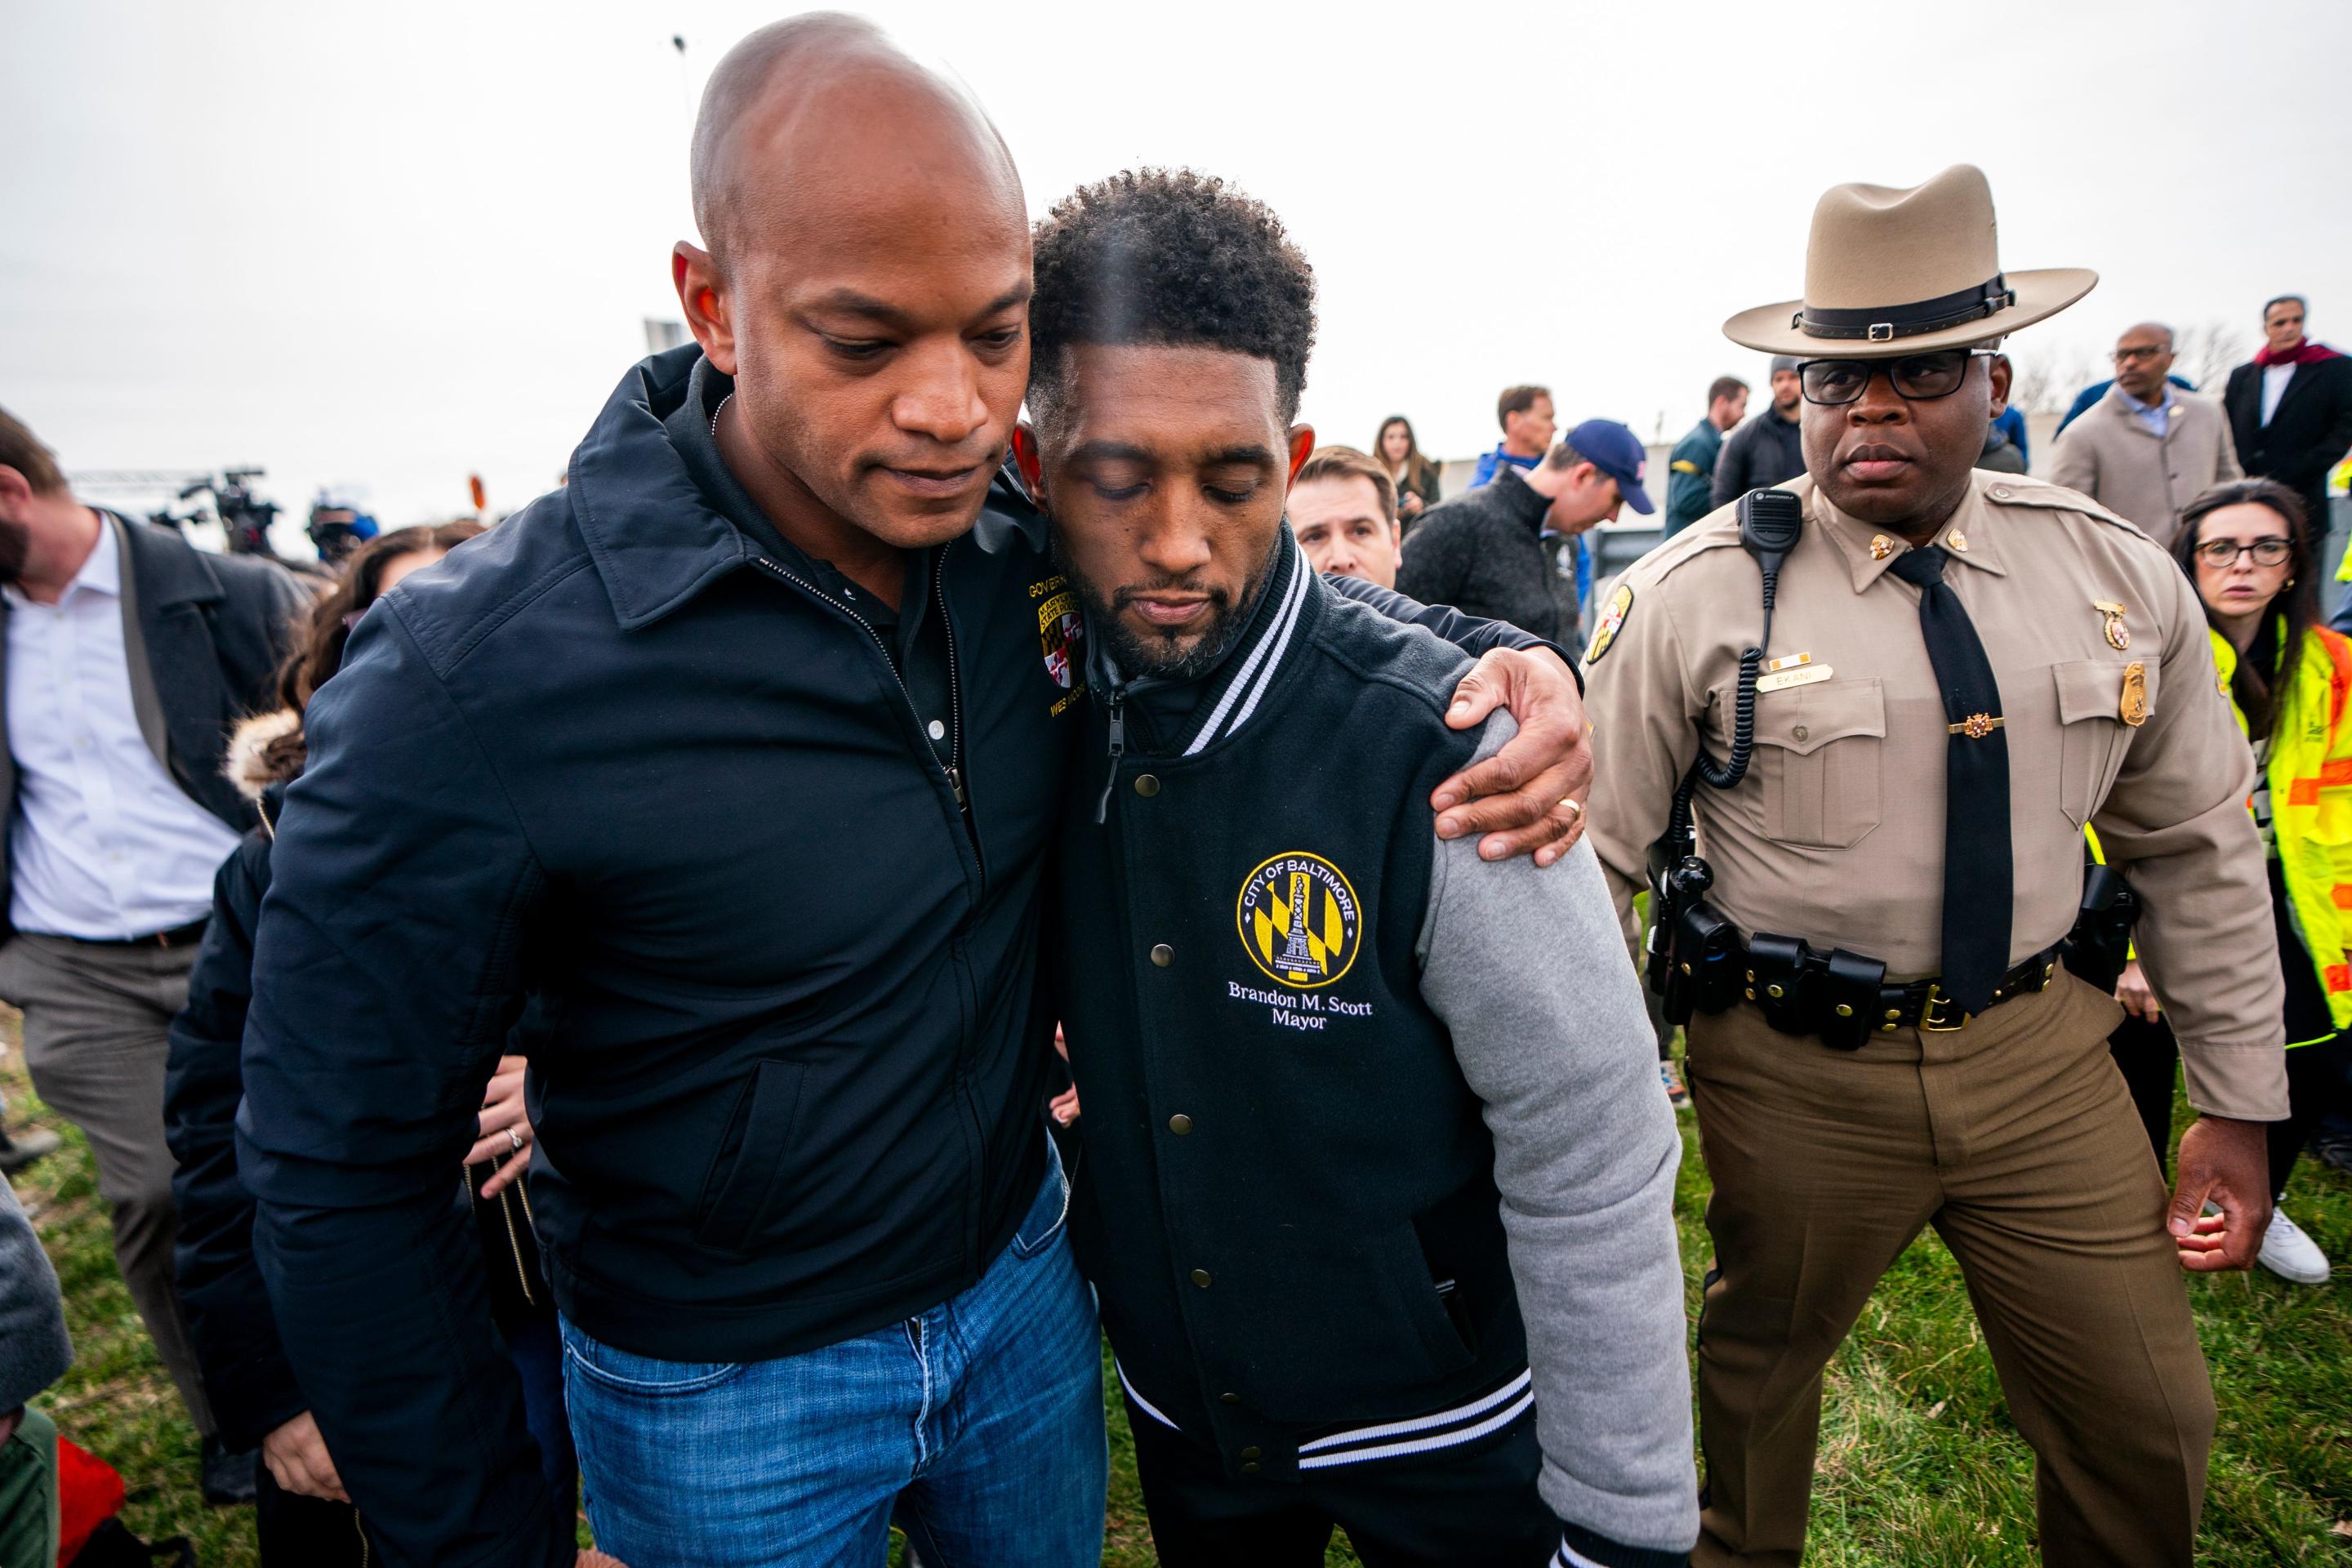 Maryland Governor Wes Moore (L) and Baltimore Mayor Brandon Scott (C) react following a press conference at the scene. (Shawn Thew/EPA-EFE/Shutterstock)